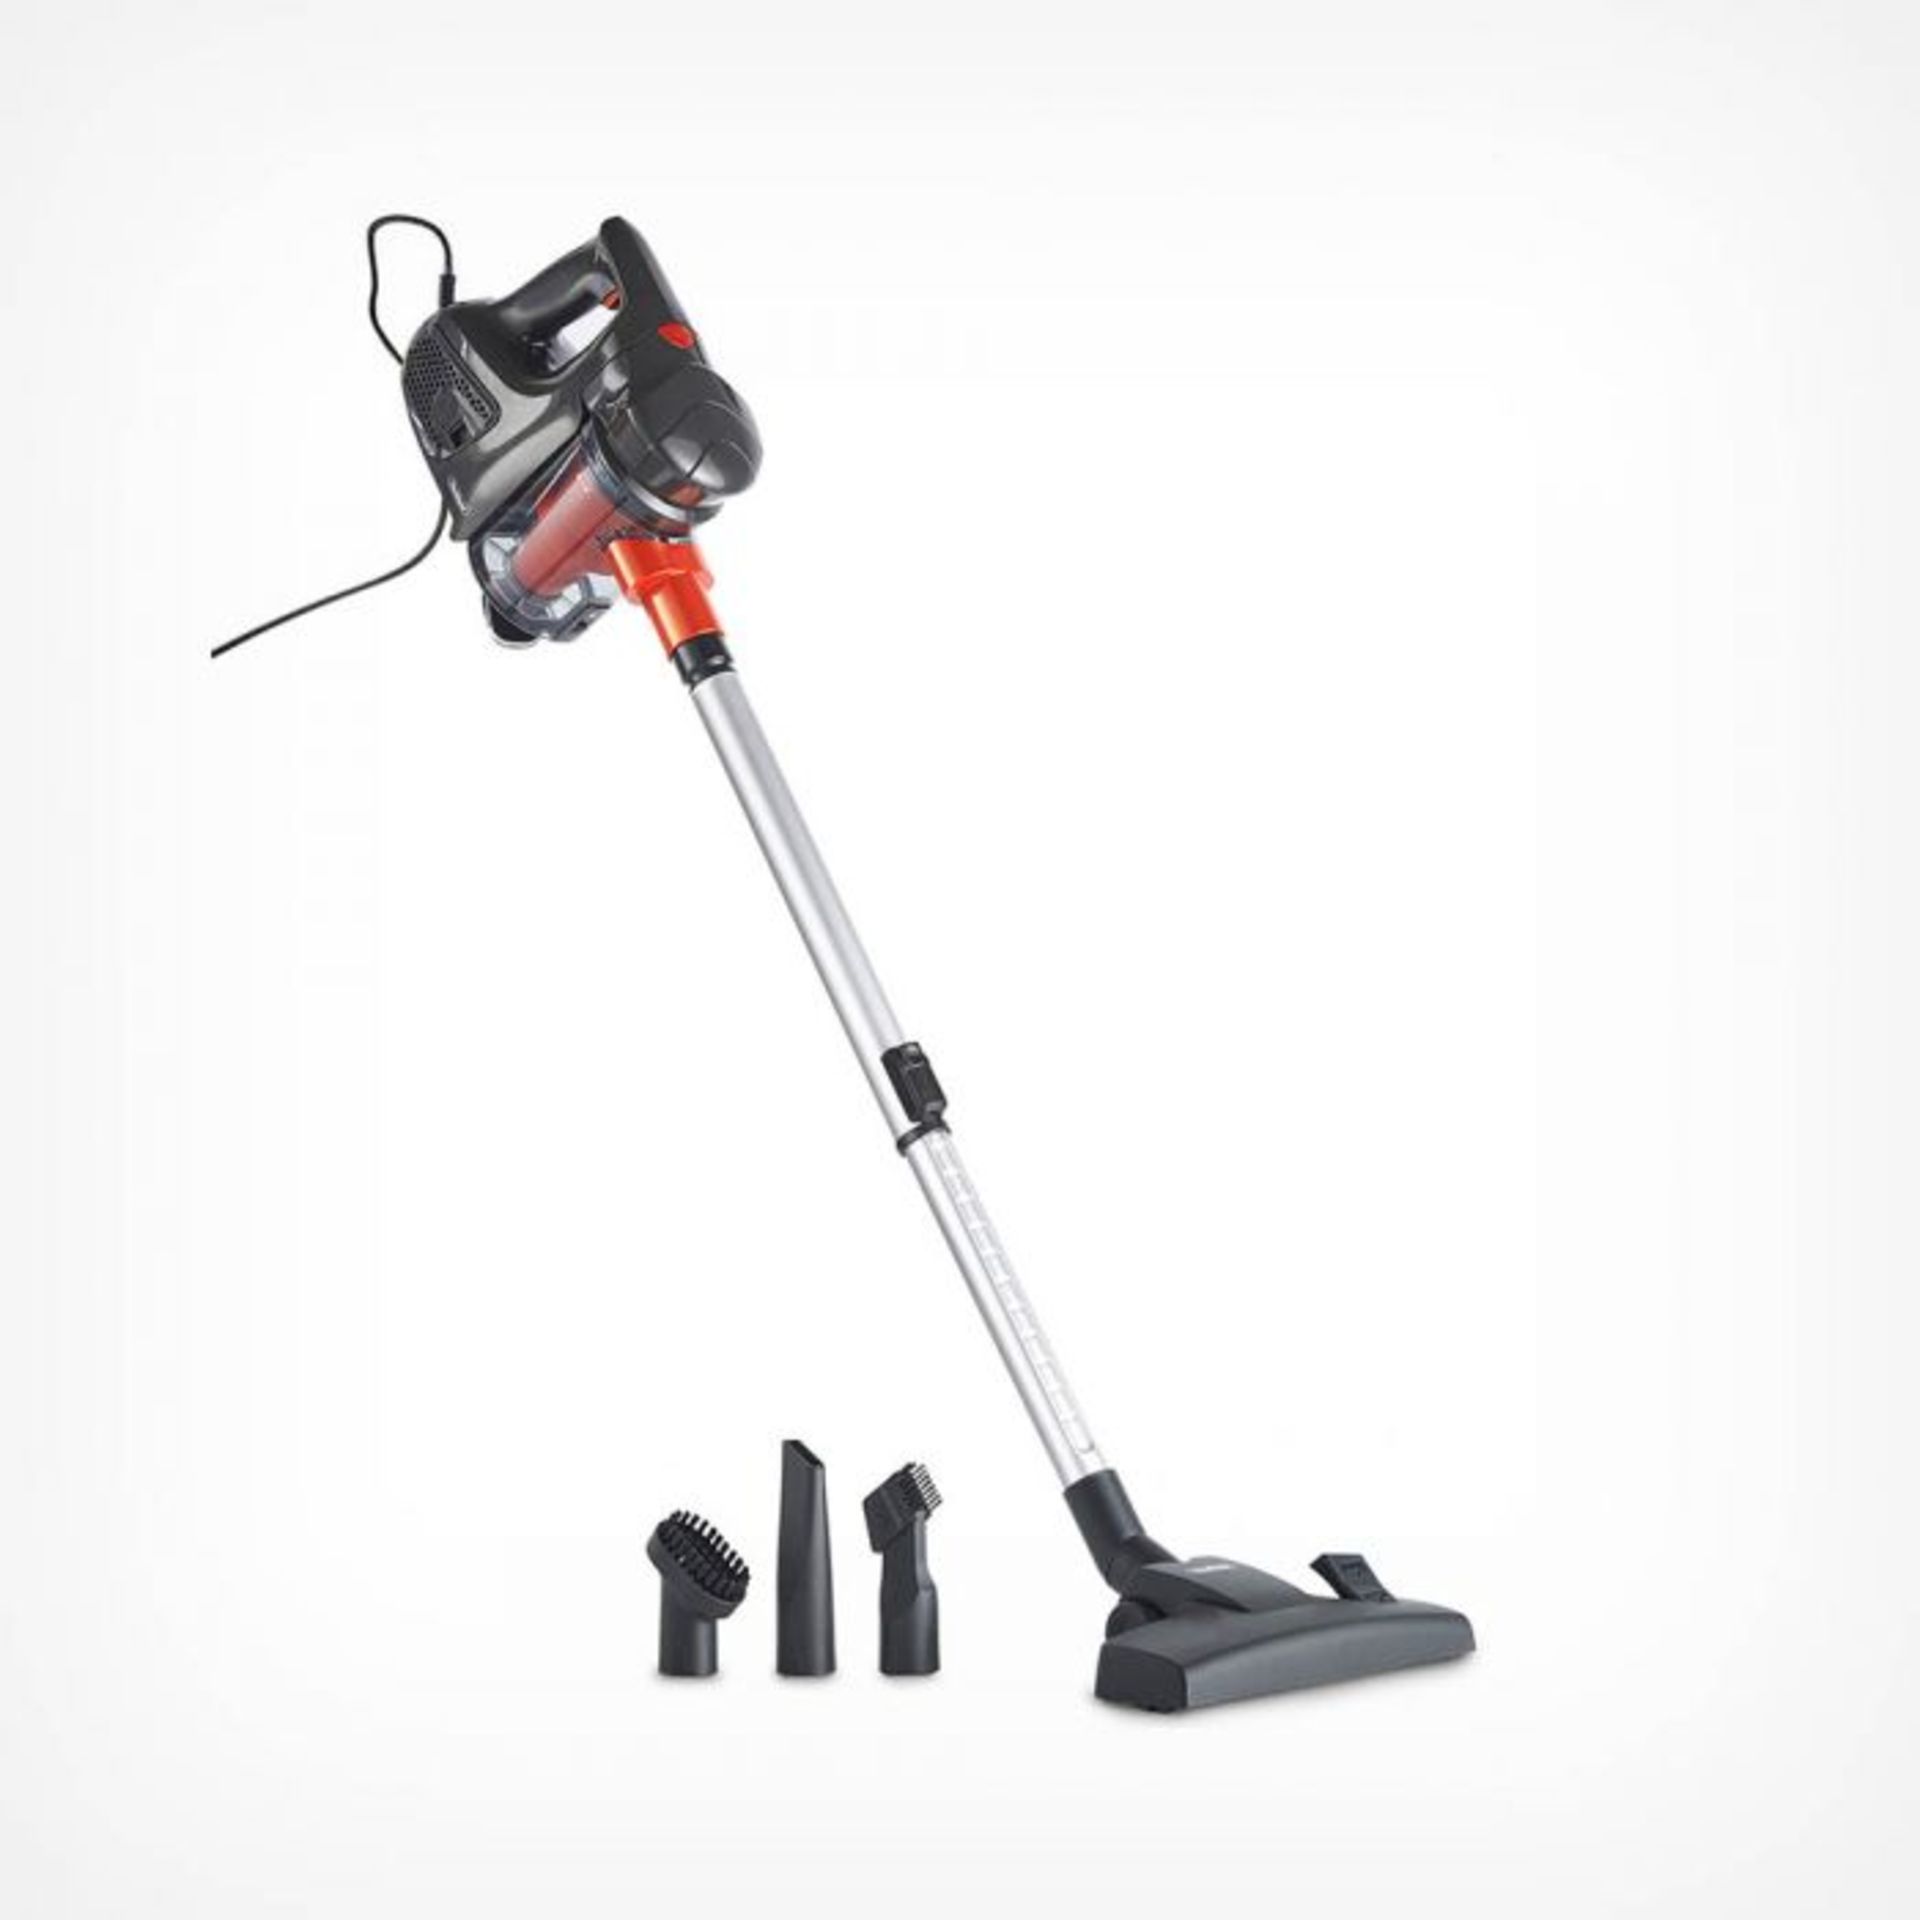 (S5) Corded Stick Vacuum Cleaner 600W Floor to ceiling cleaning power – effortlessly switch ... - Image 2 of 3